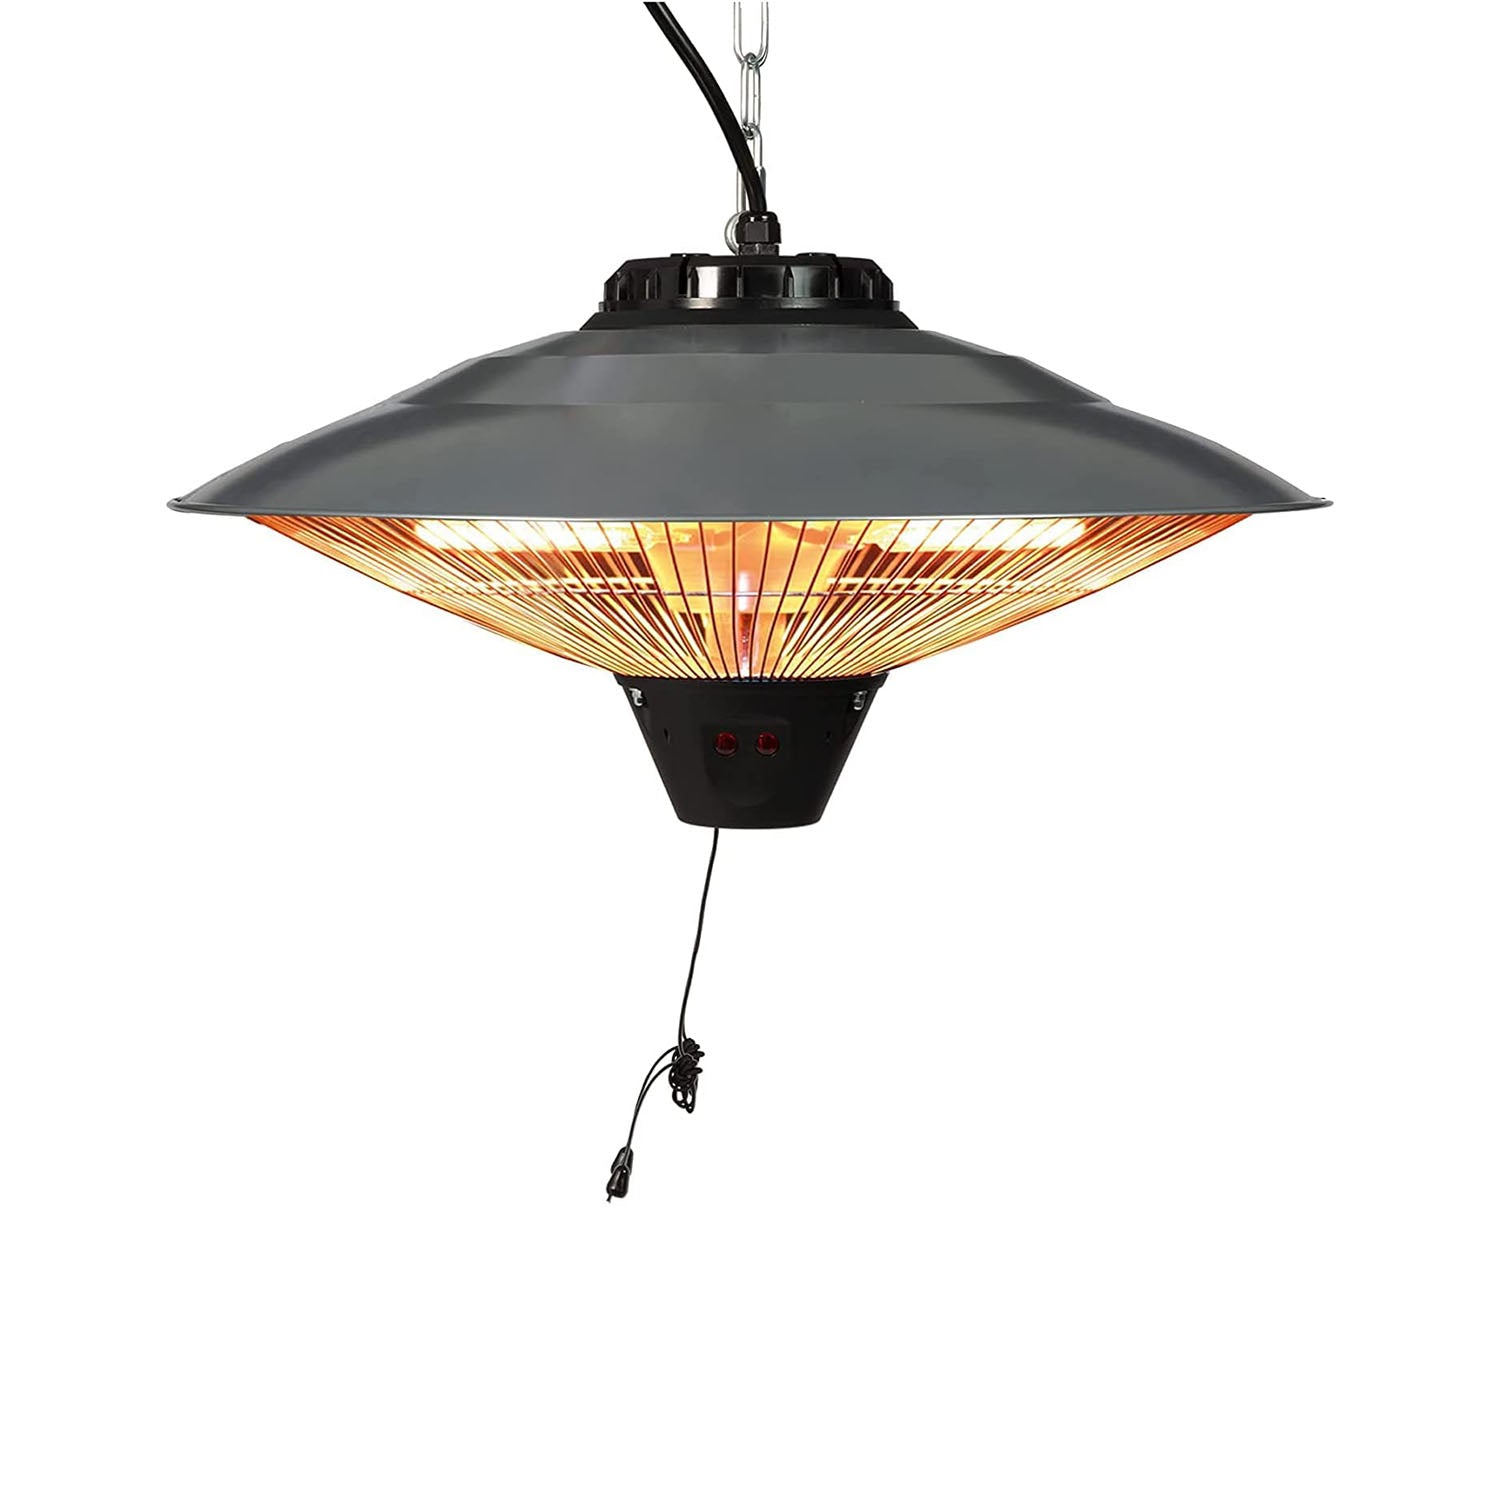 Electric Patio Heater, Ceiling Mounted or Hanging Patio Infrared heater, Waterproof IP24